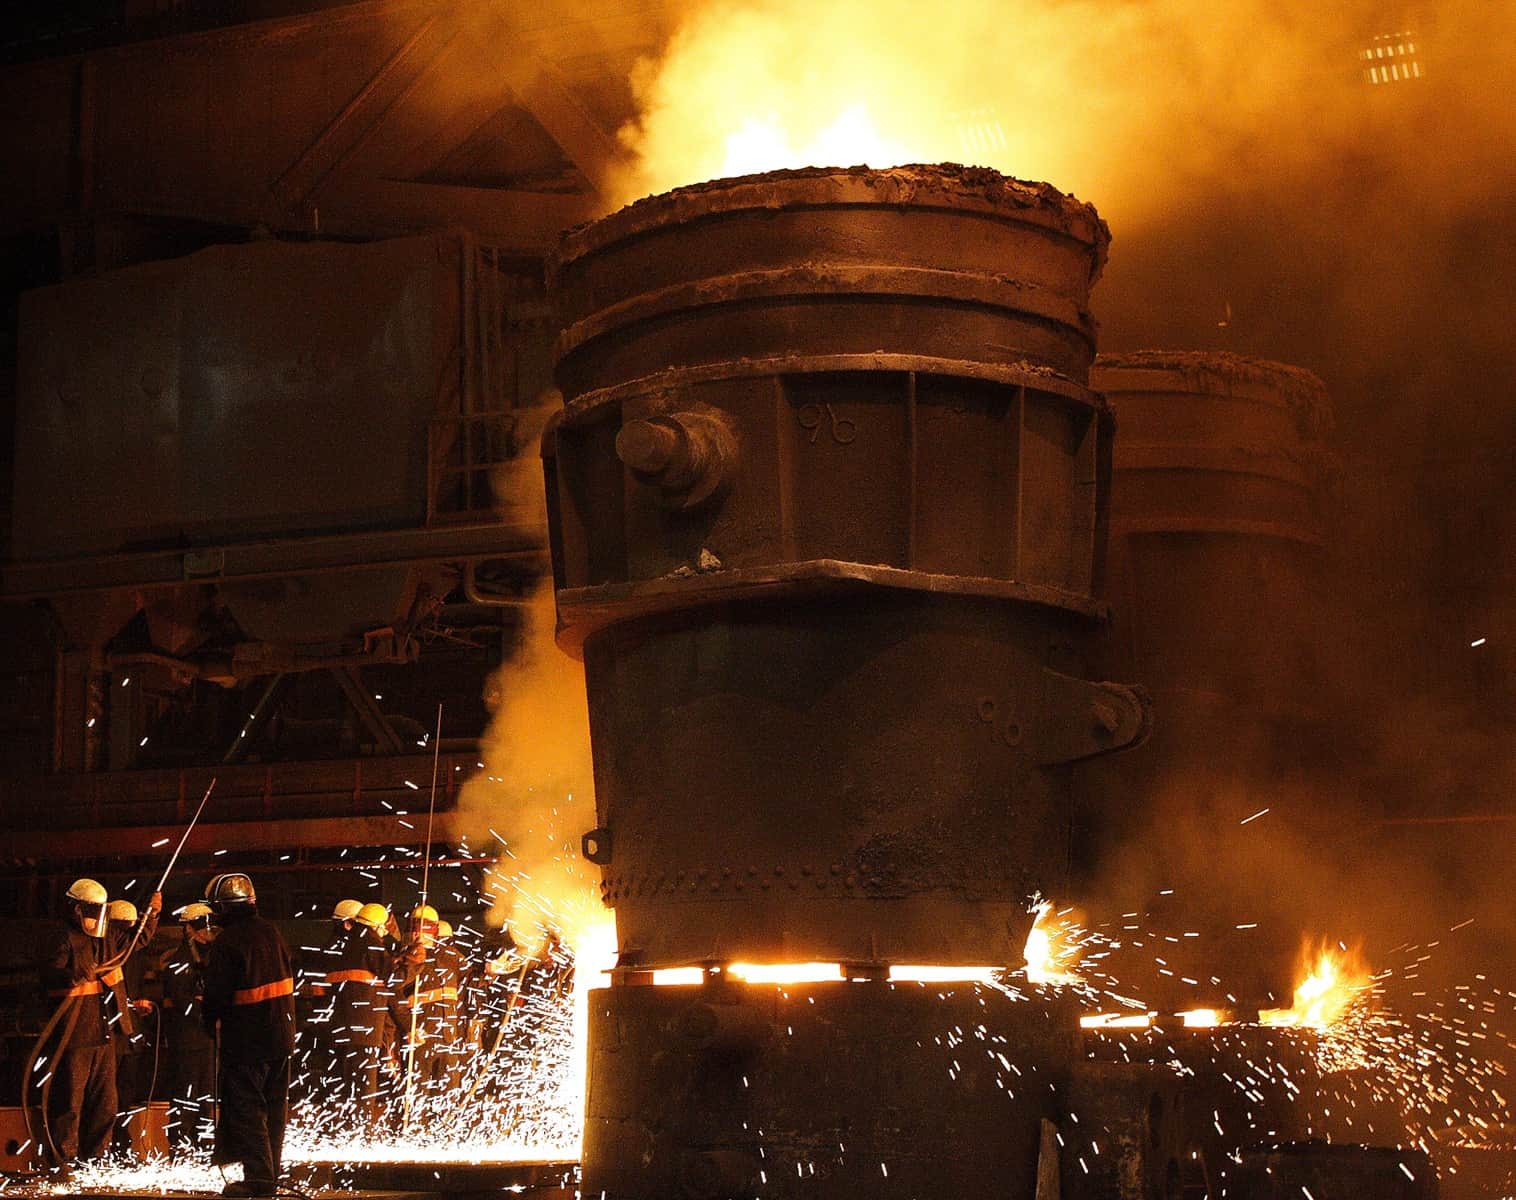 Large casting pour scheduled for Sheffield Forgemasters’ foundry